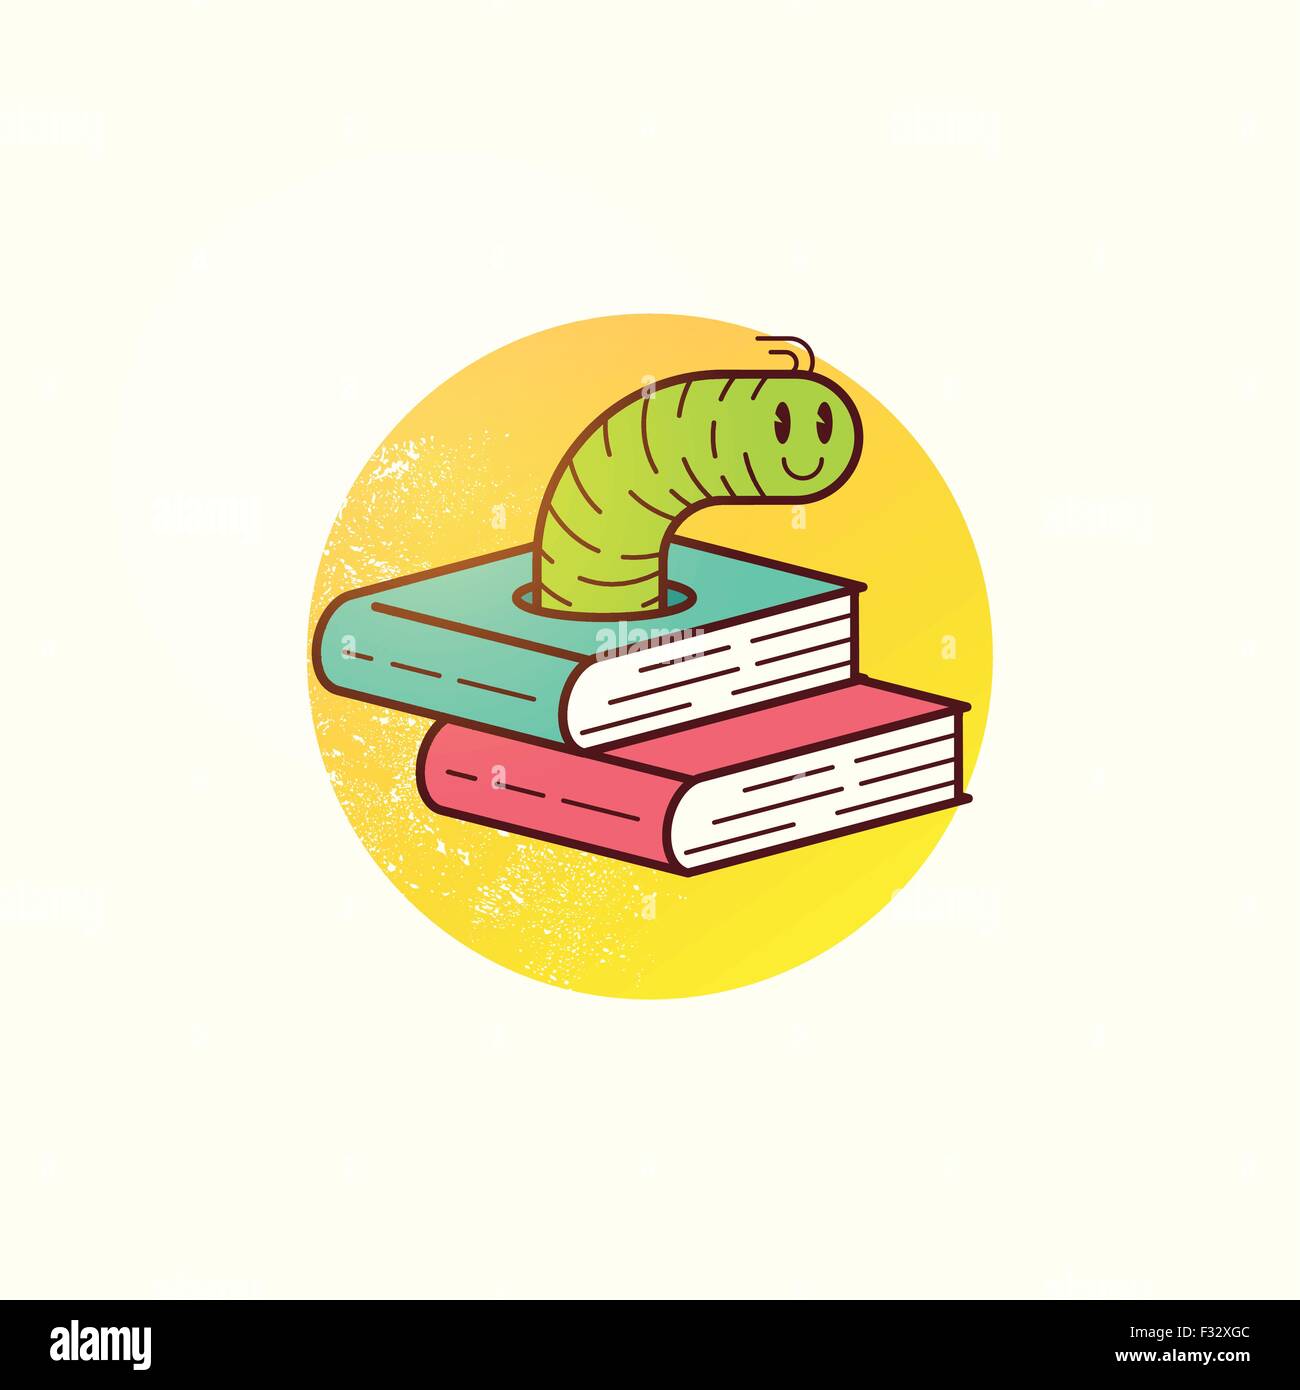 Book Worm Vector. Education and learning. A happy worm munching through books and information! Vector illustration. Stock Vector